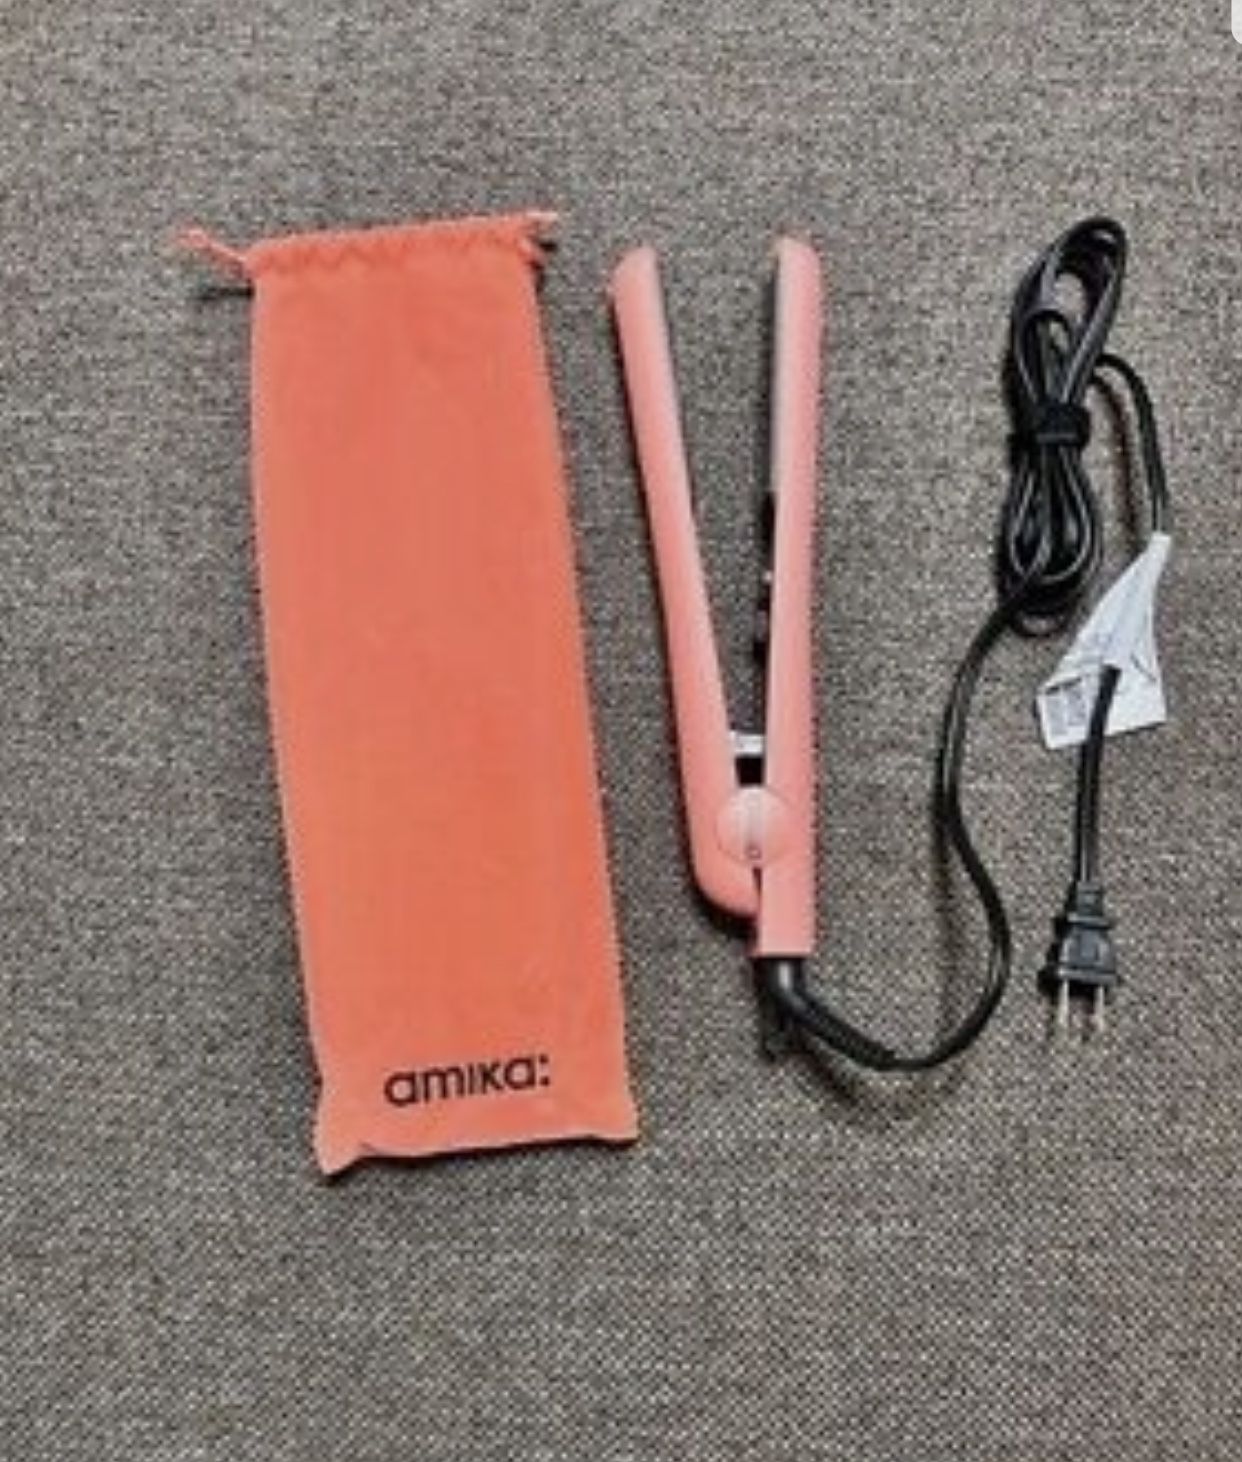 NEW IN BOX - AMIKA  limited edition Hair straightener with travel bag